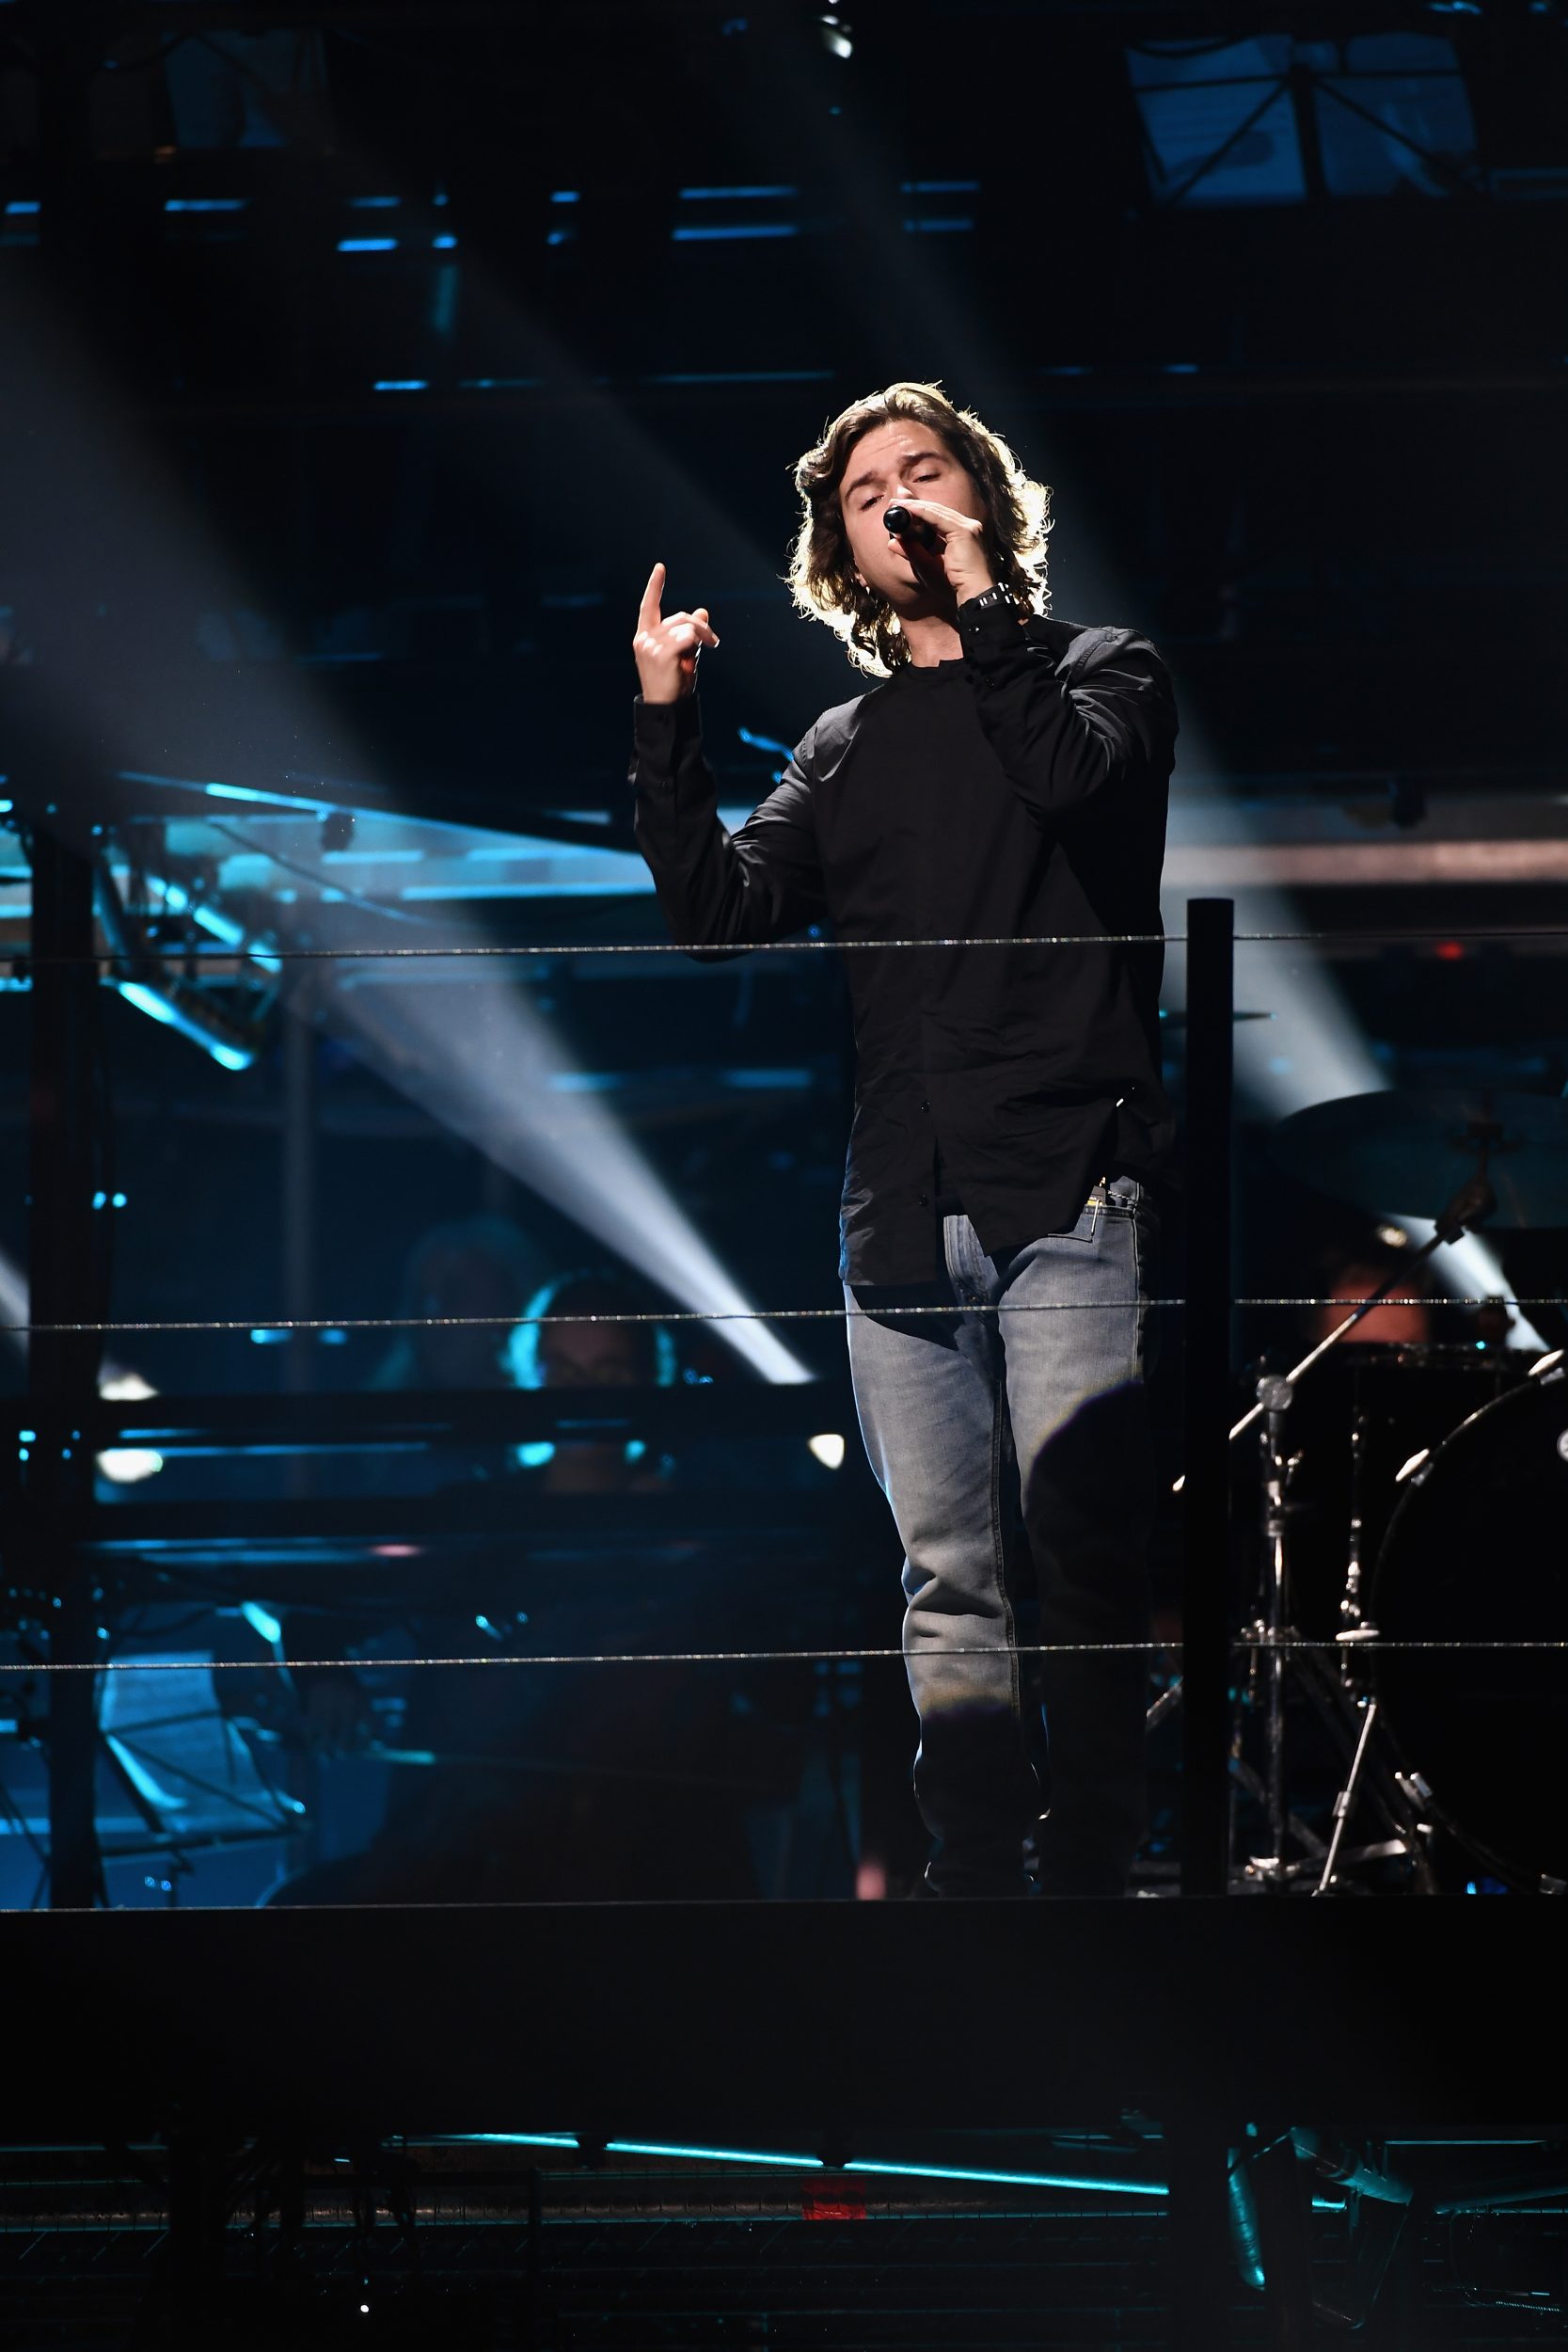 ROTTERDAM, NETHERLANDS - NOVEMBER 05:  Lead singer Lukas Forchhammer from Lukas Graham during open rehearsal ahead of the MTV Europe Music Awards 2016 on November 5, 2016 in Rotterdam, Netherlands. The MTV Europe Music Awards 2016 is held on November 6, 2016.  (Photo by Ian Gavan/MTV 2016/Getty Images for MTV) *** Local Caption *** Lukas Forchhammer